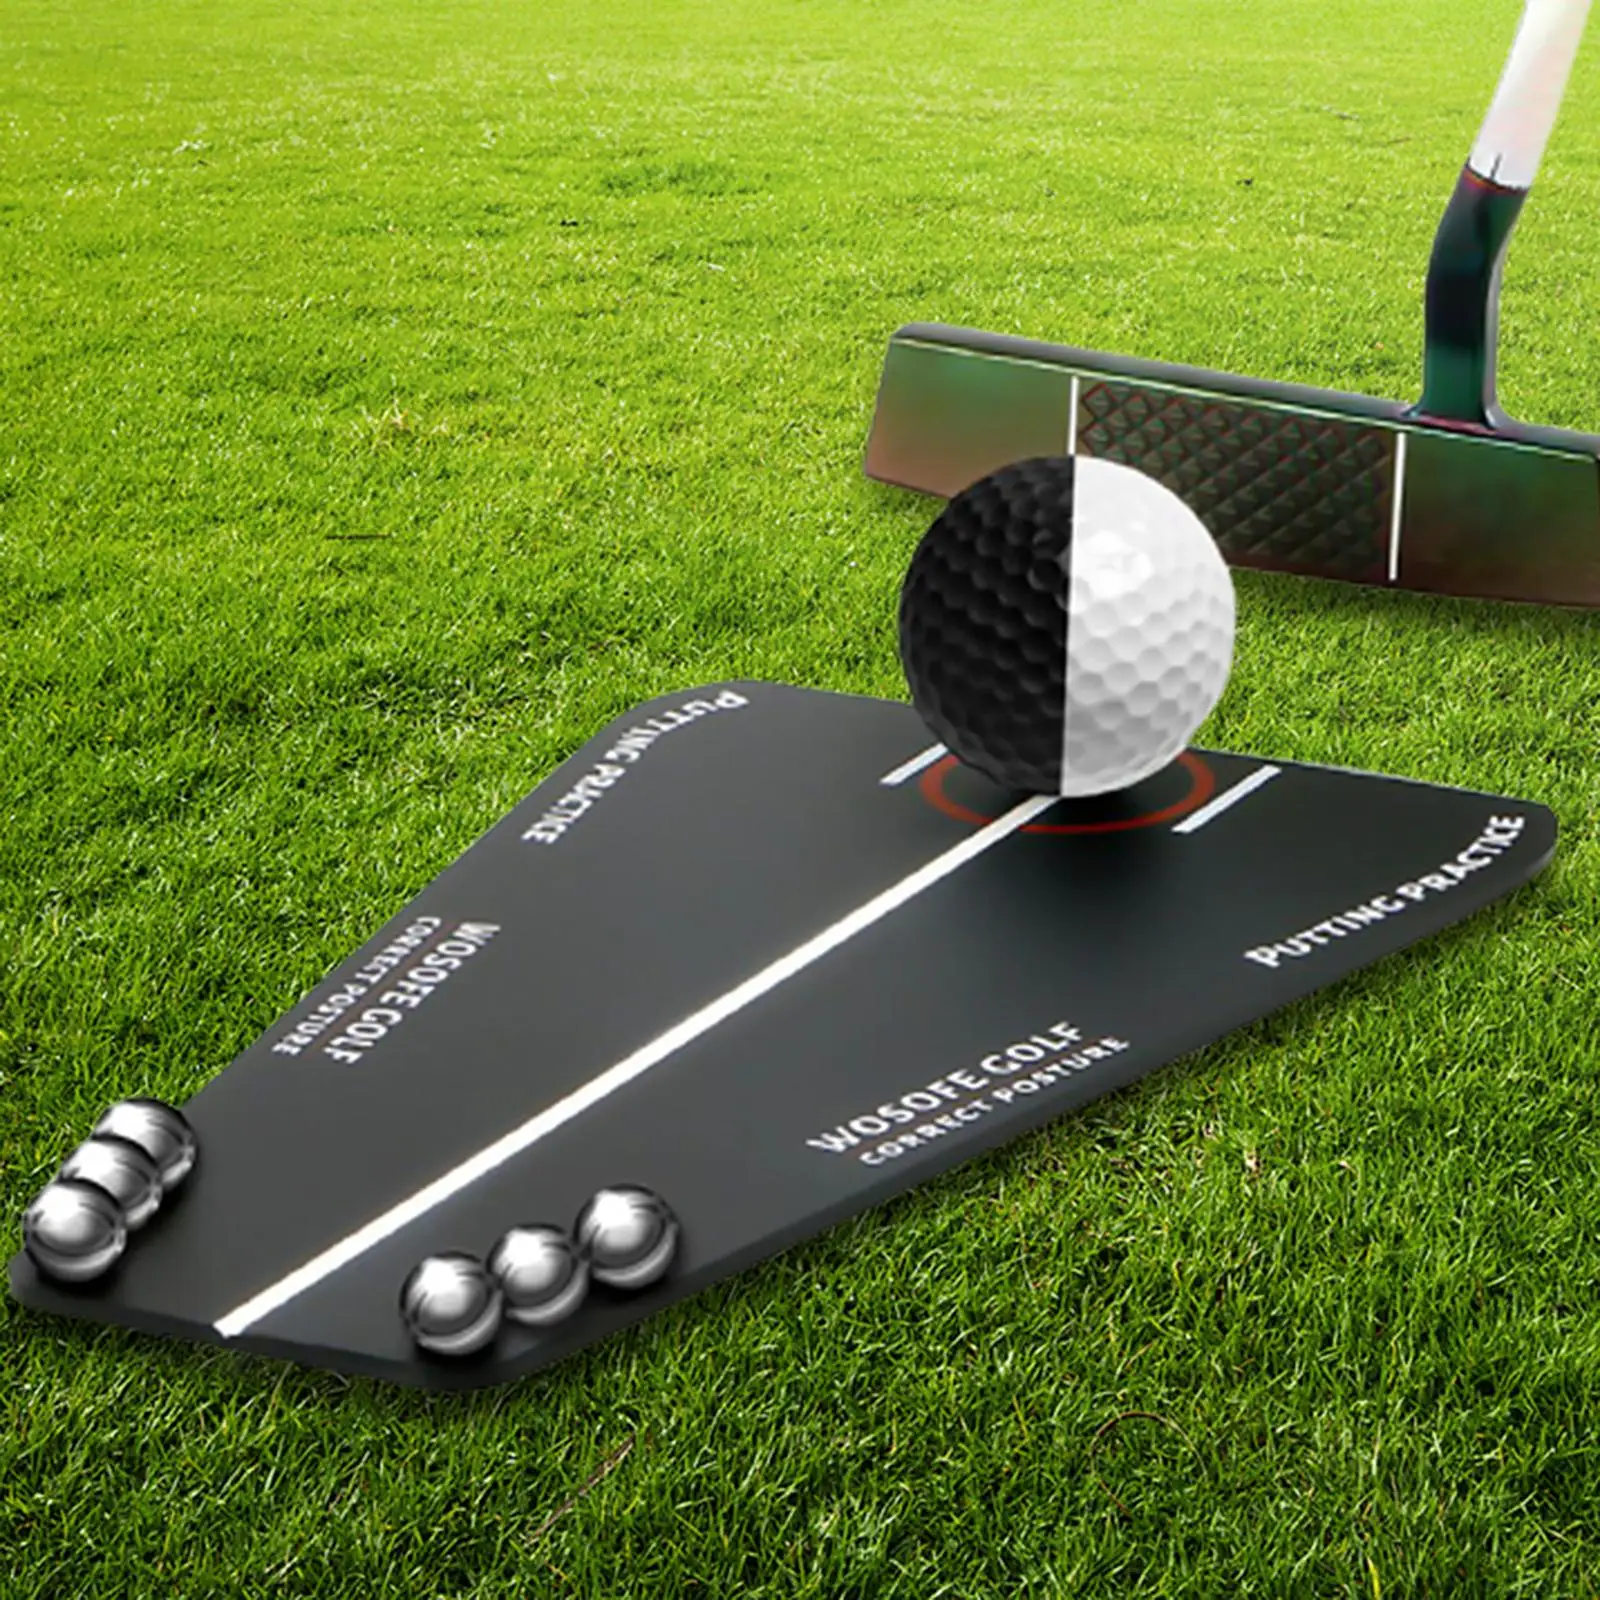 Golf Putting Aid Swing Trainer Putting Alignment Adults Golf Putting